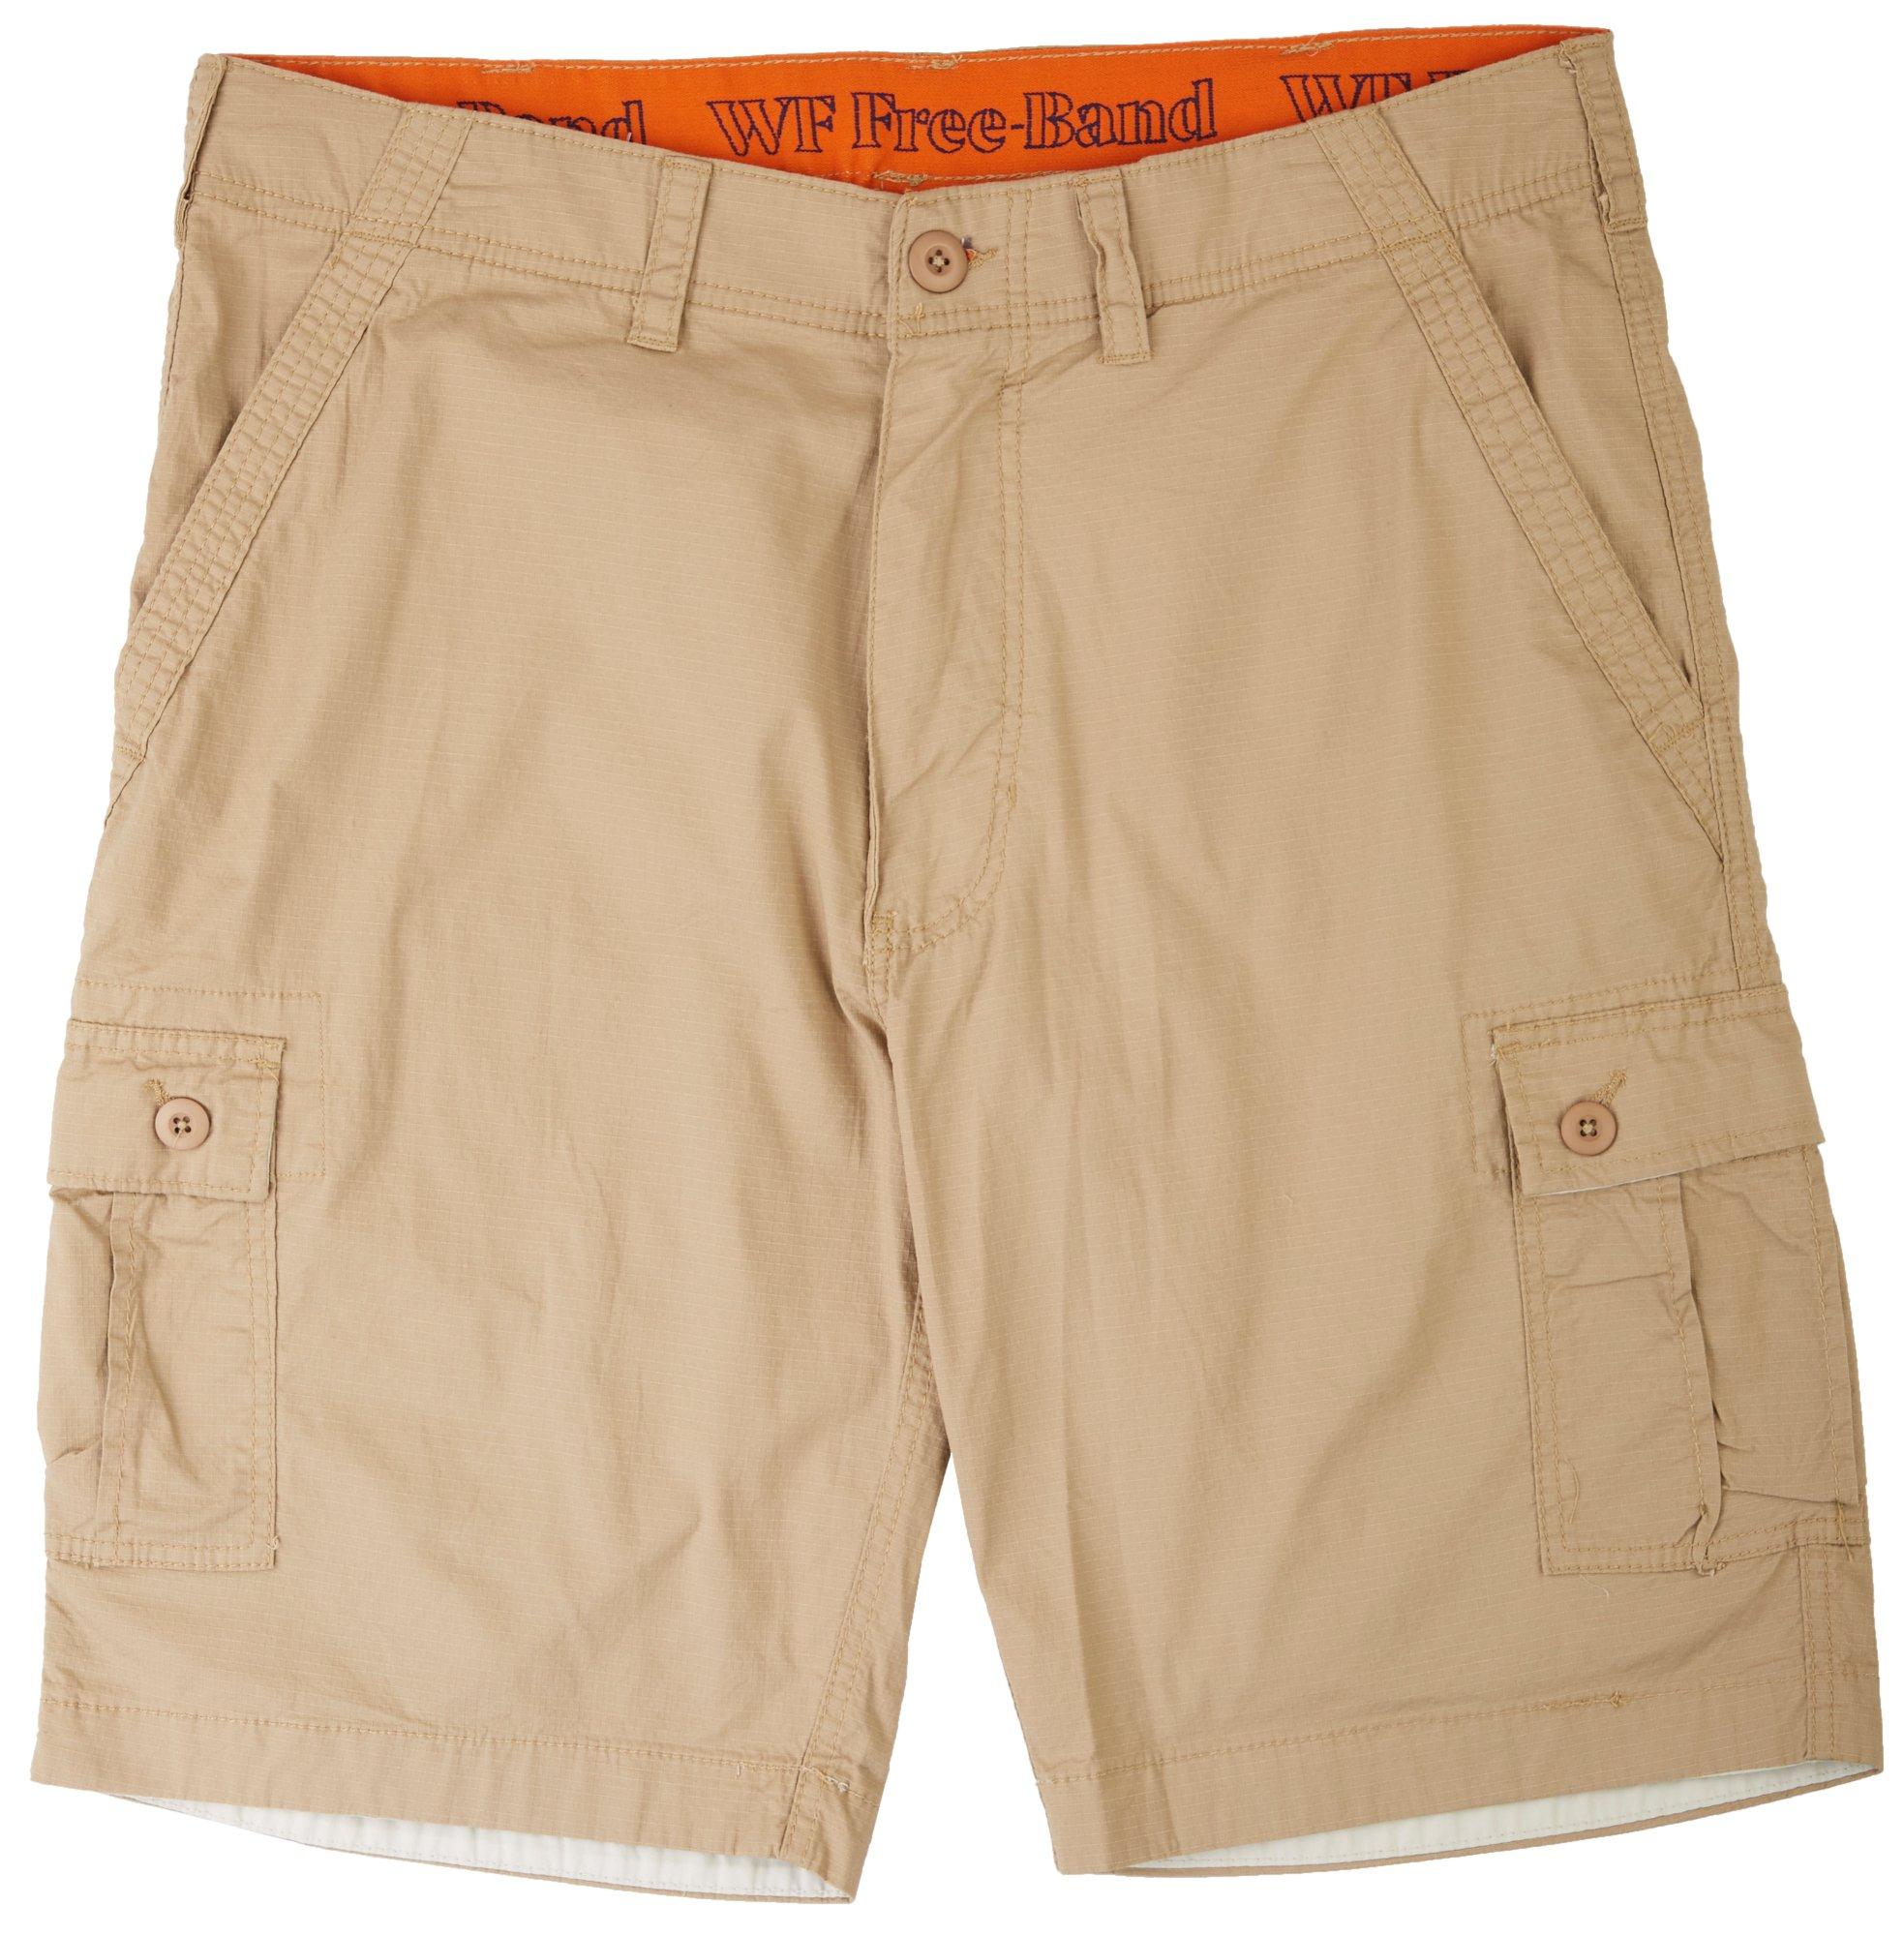 Wearfirst Mens Mindy Solid Cargo Shorts